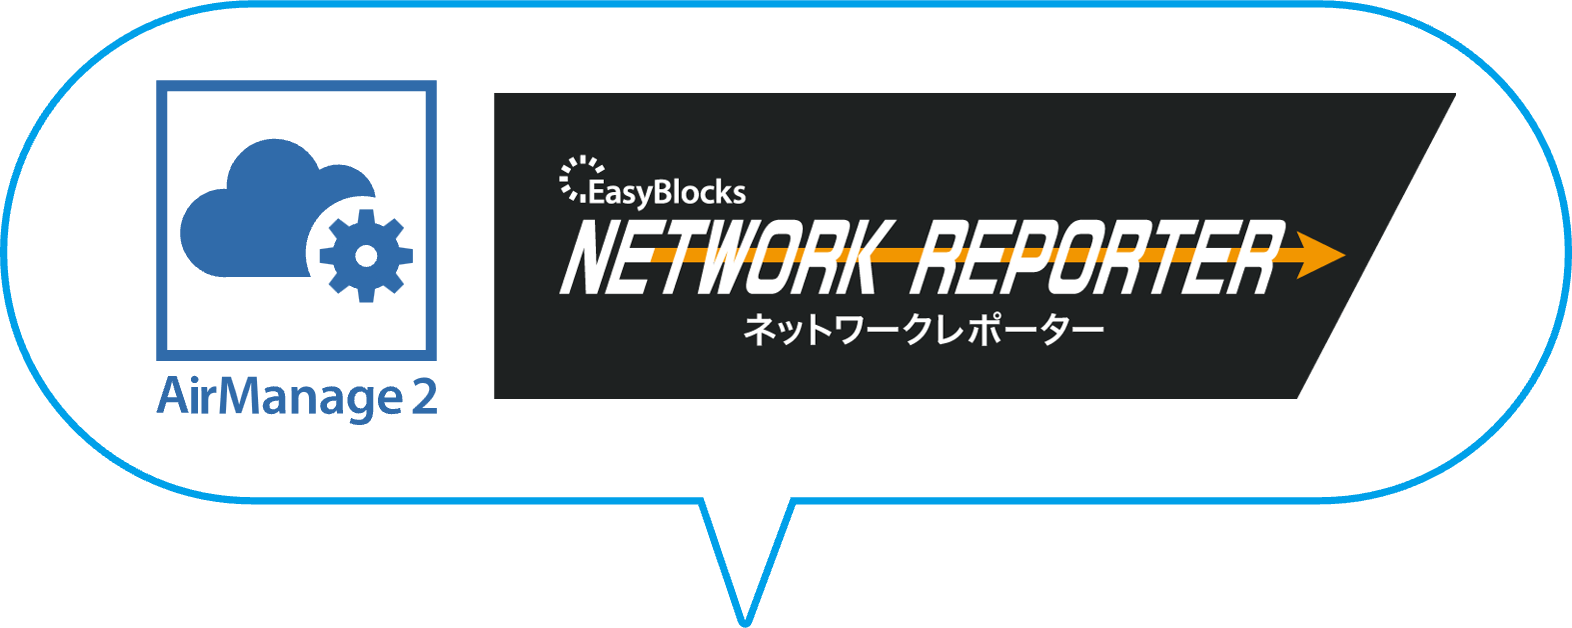 AM2とNetworkRepoter